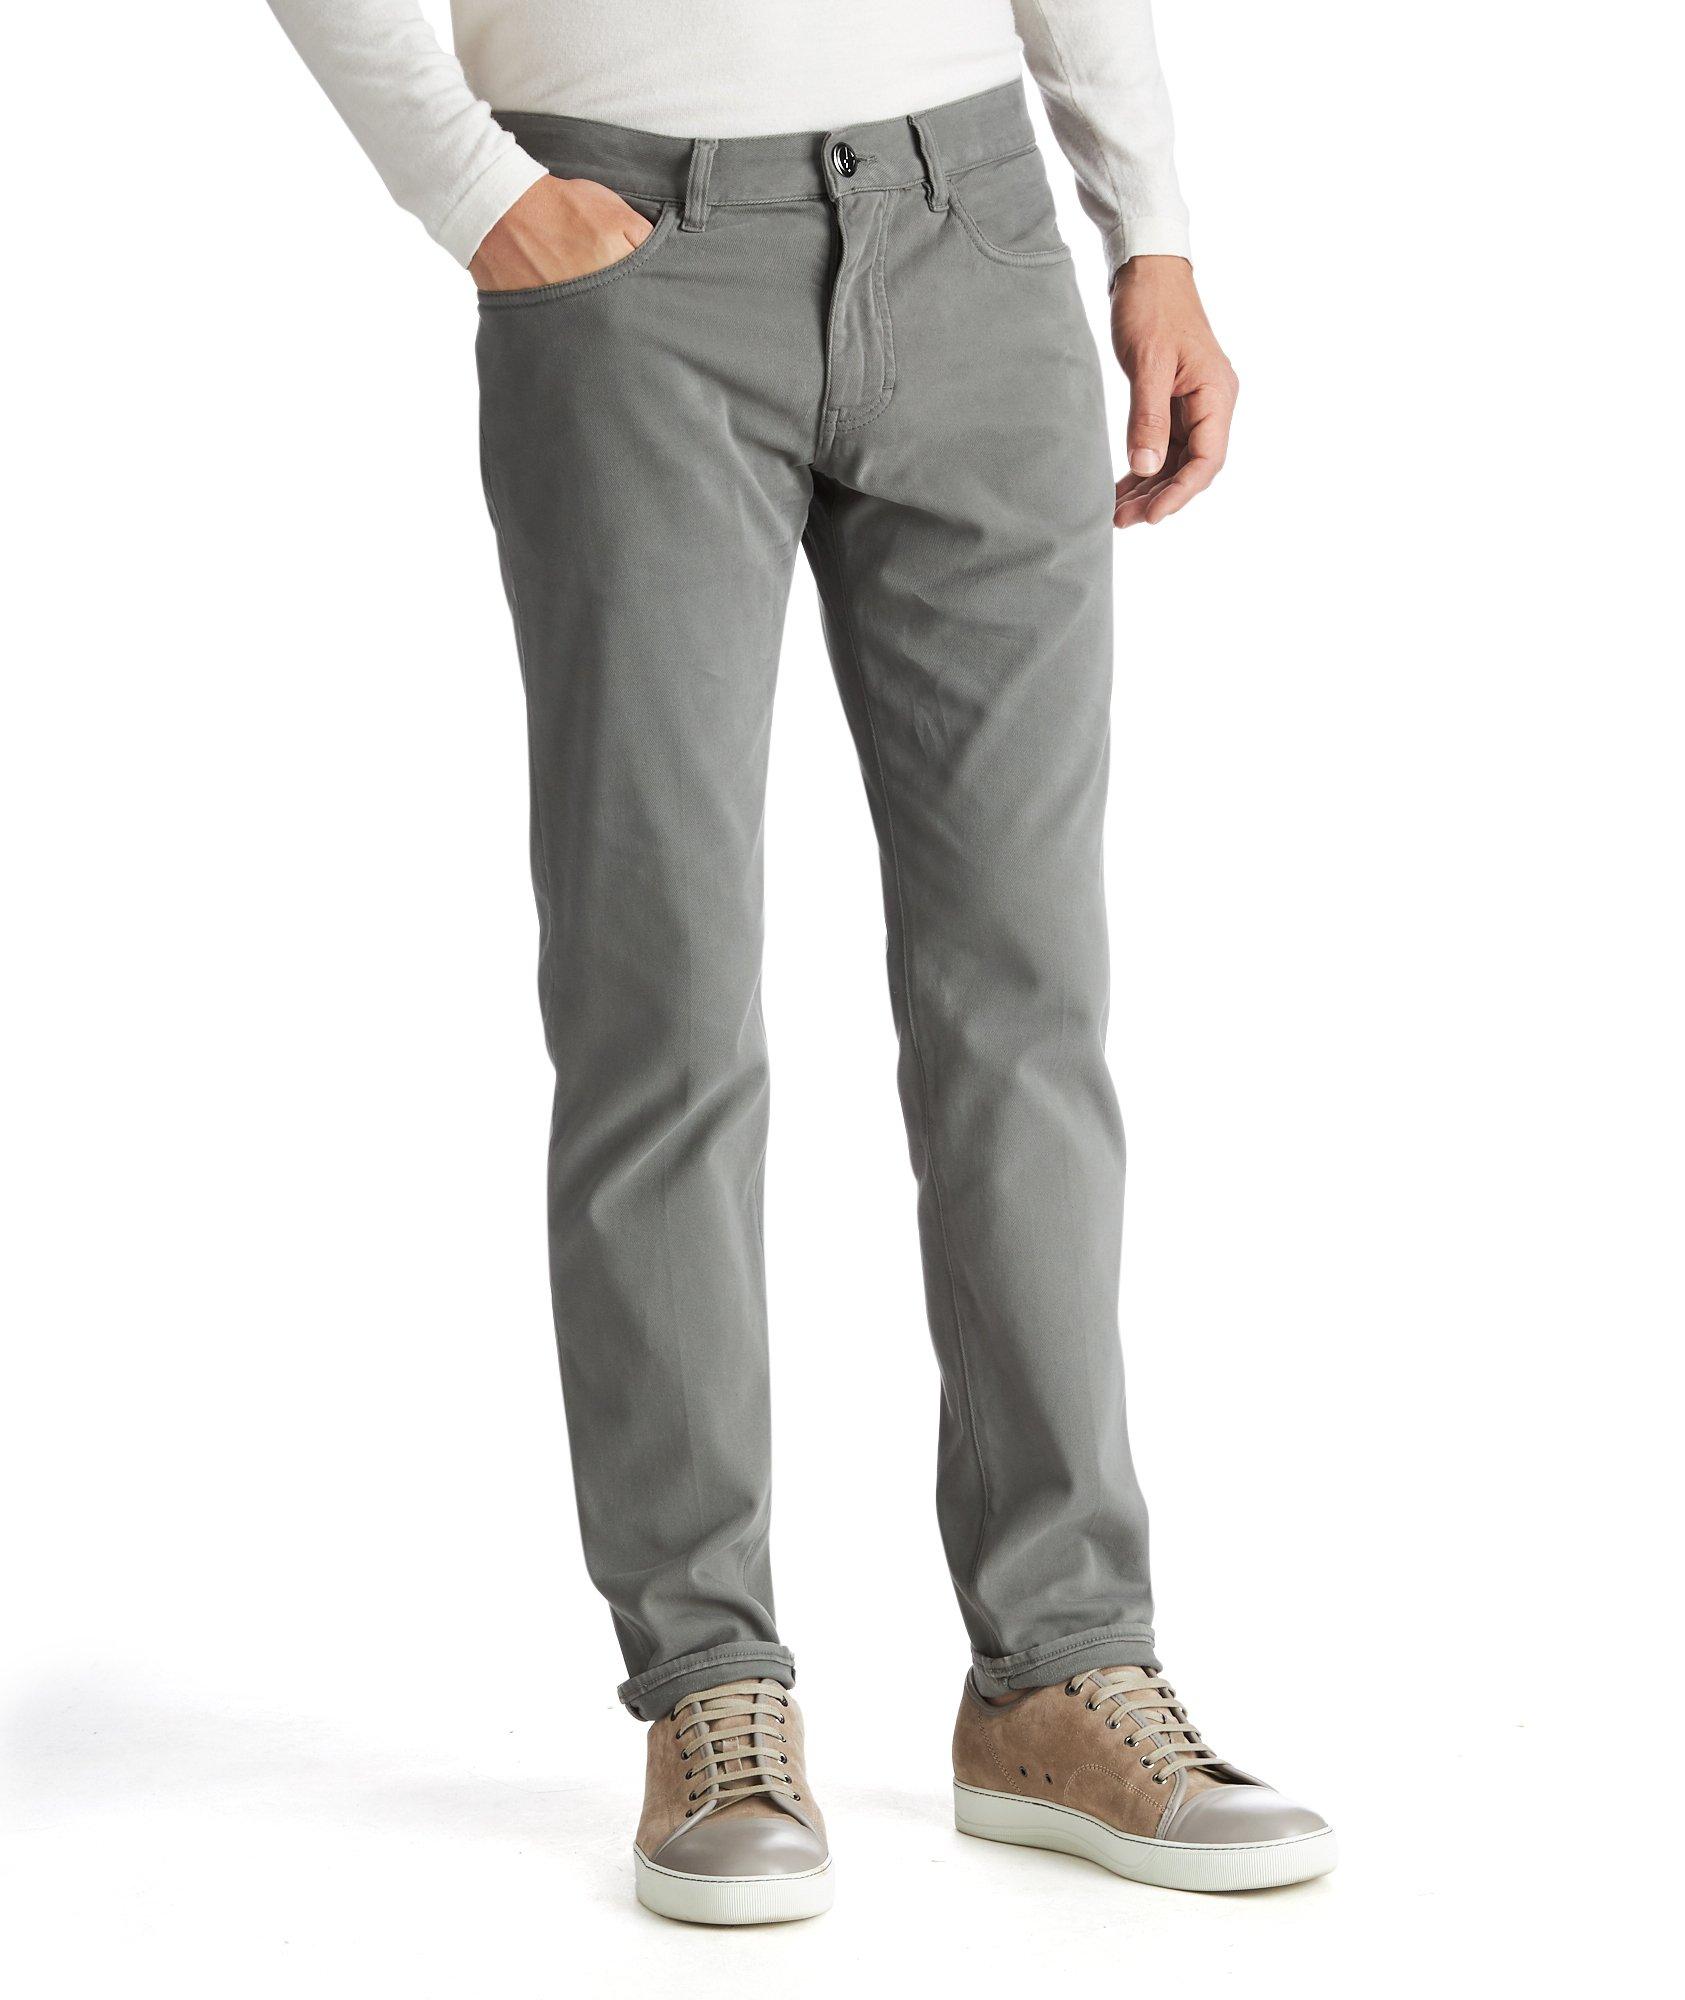 Straight Fit Pants image 0